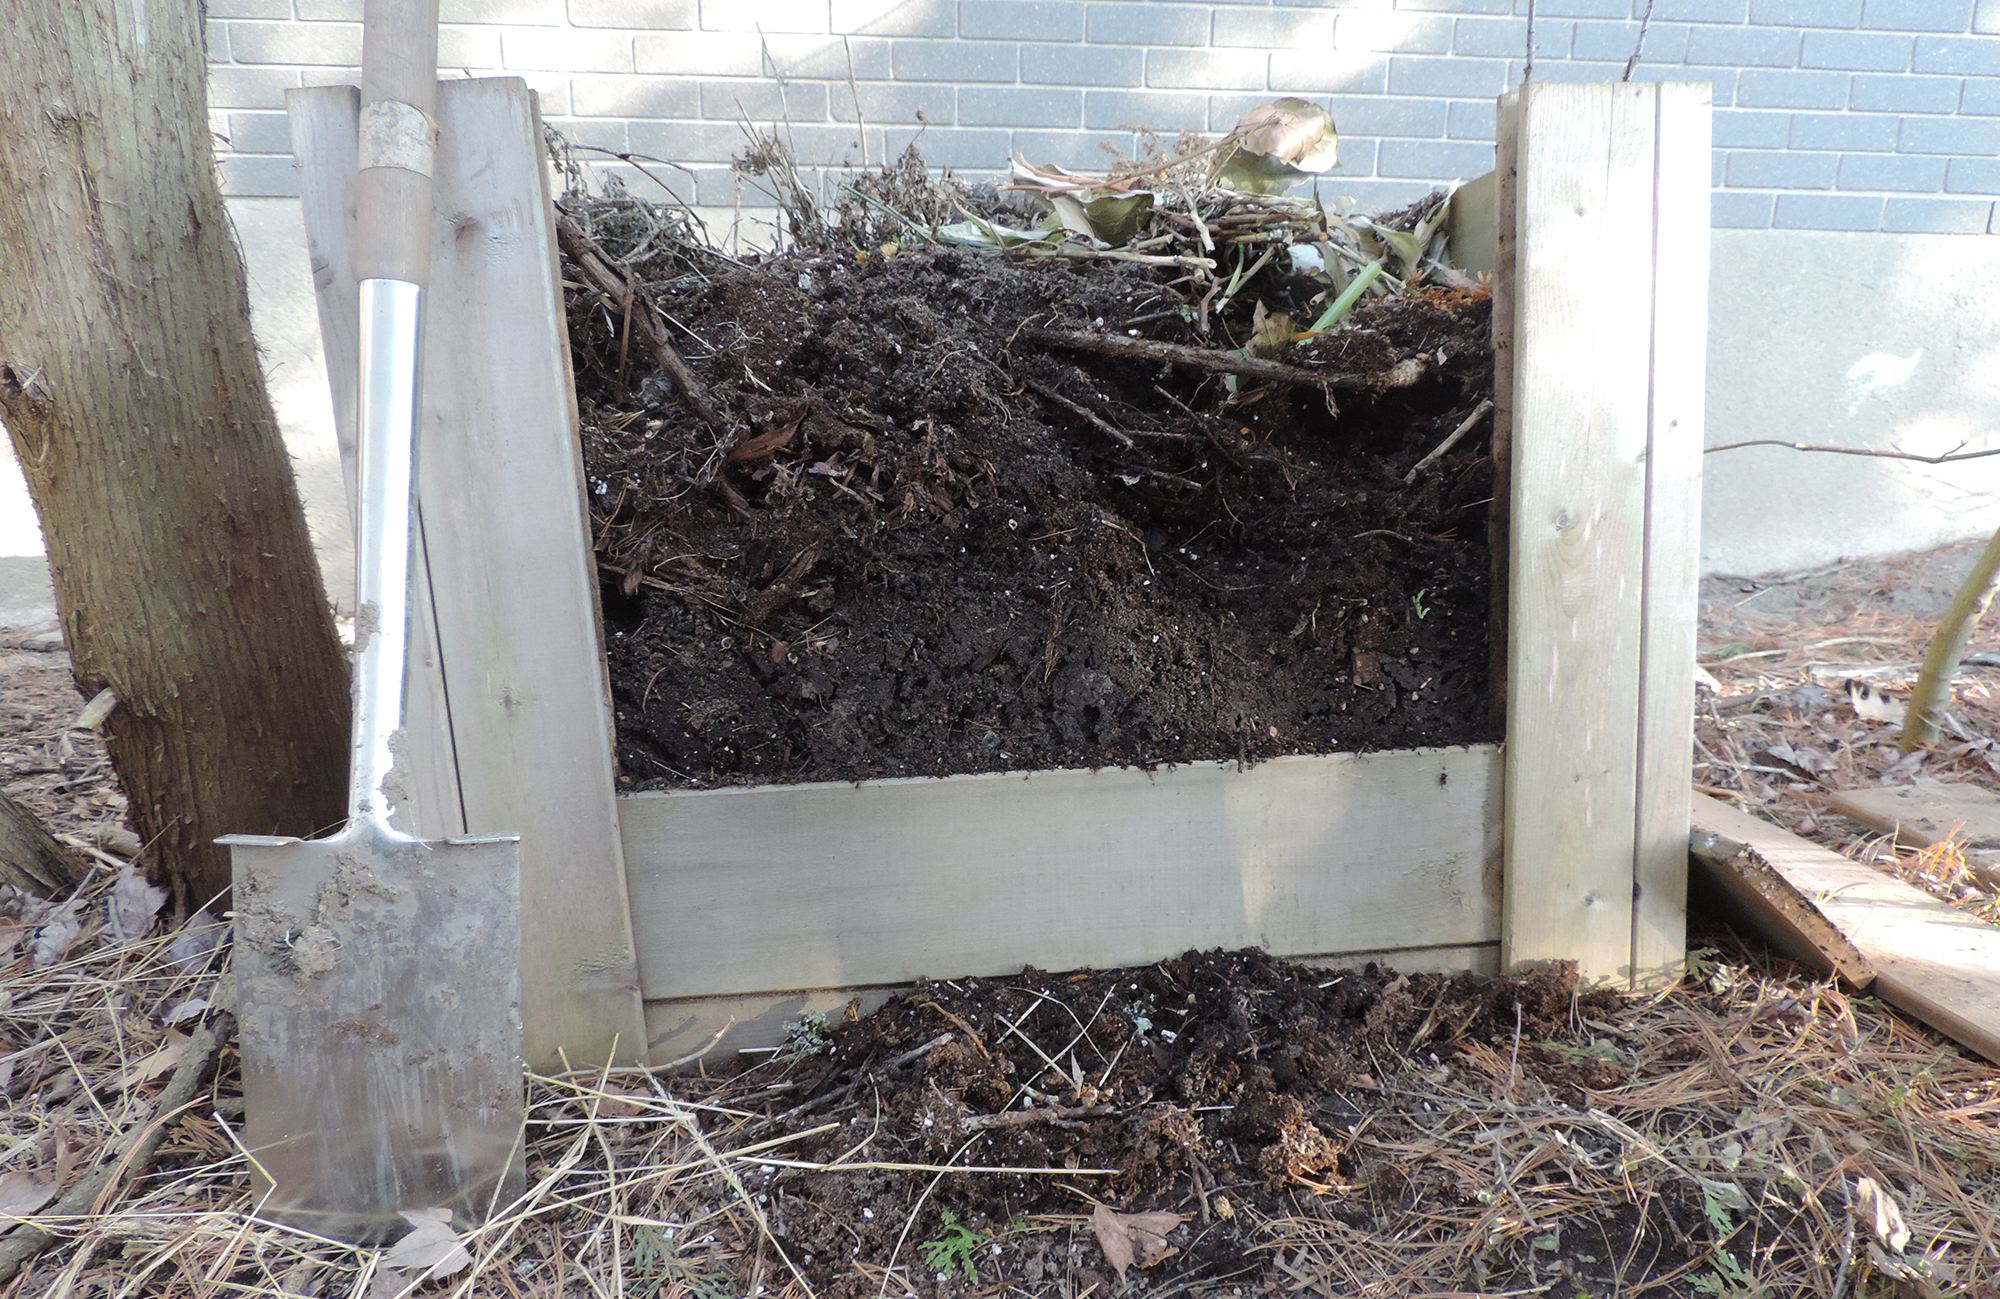 Compost pile in open wooden box.